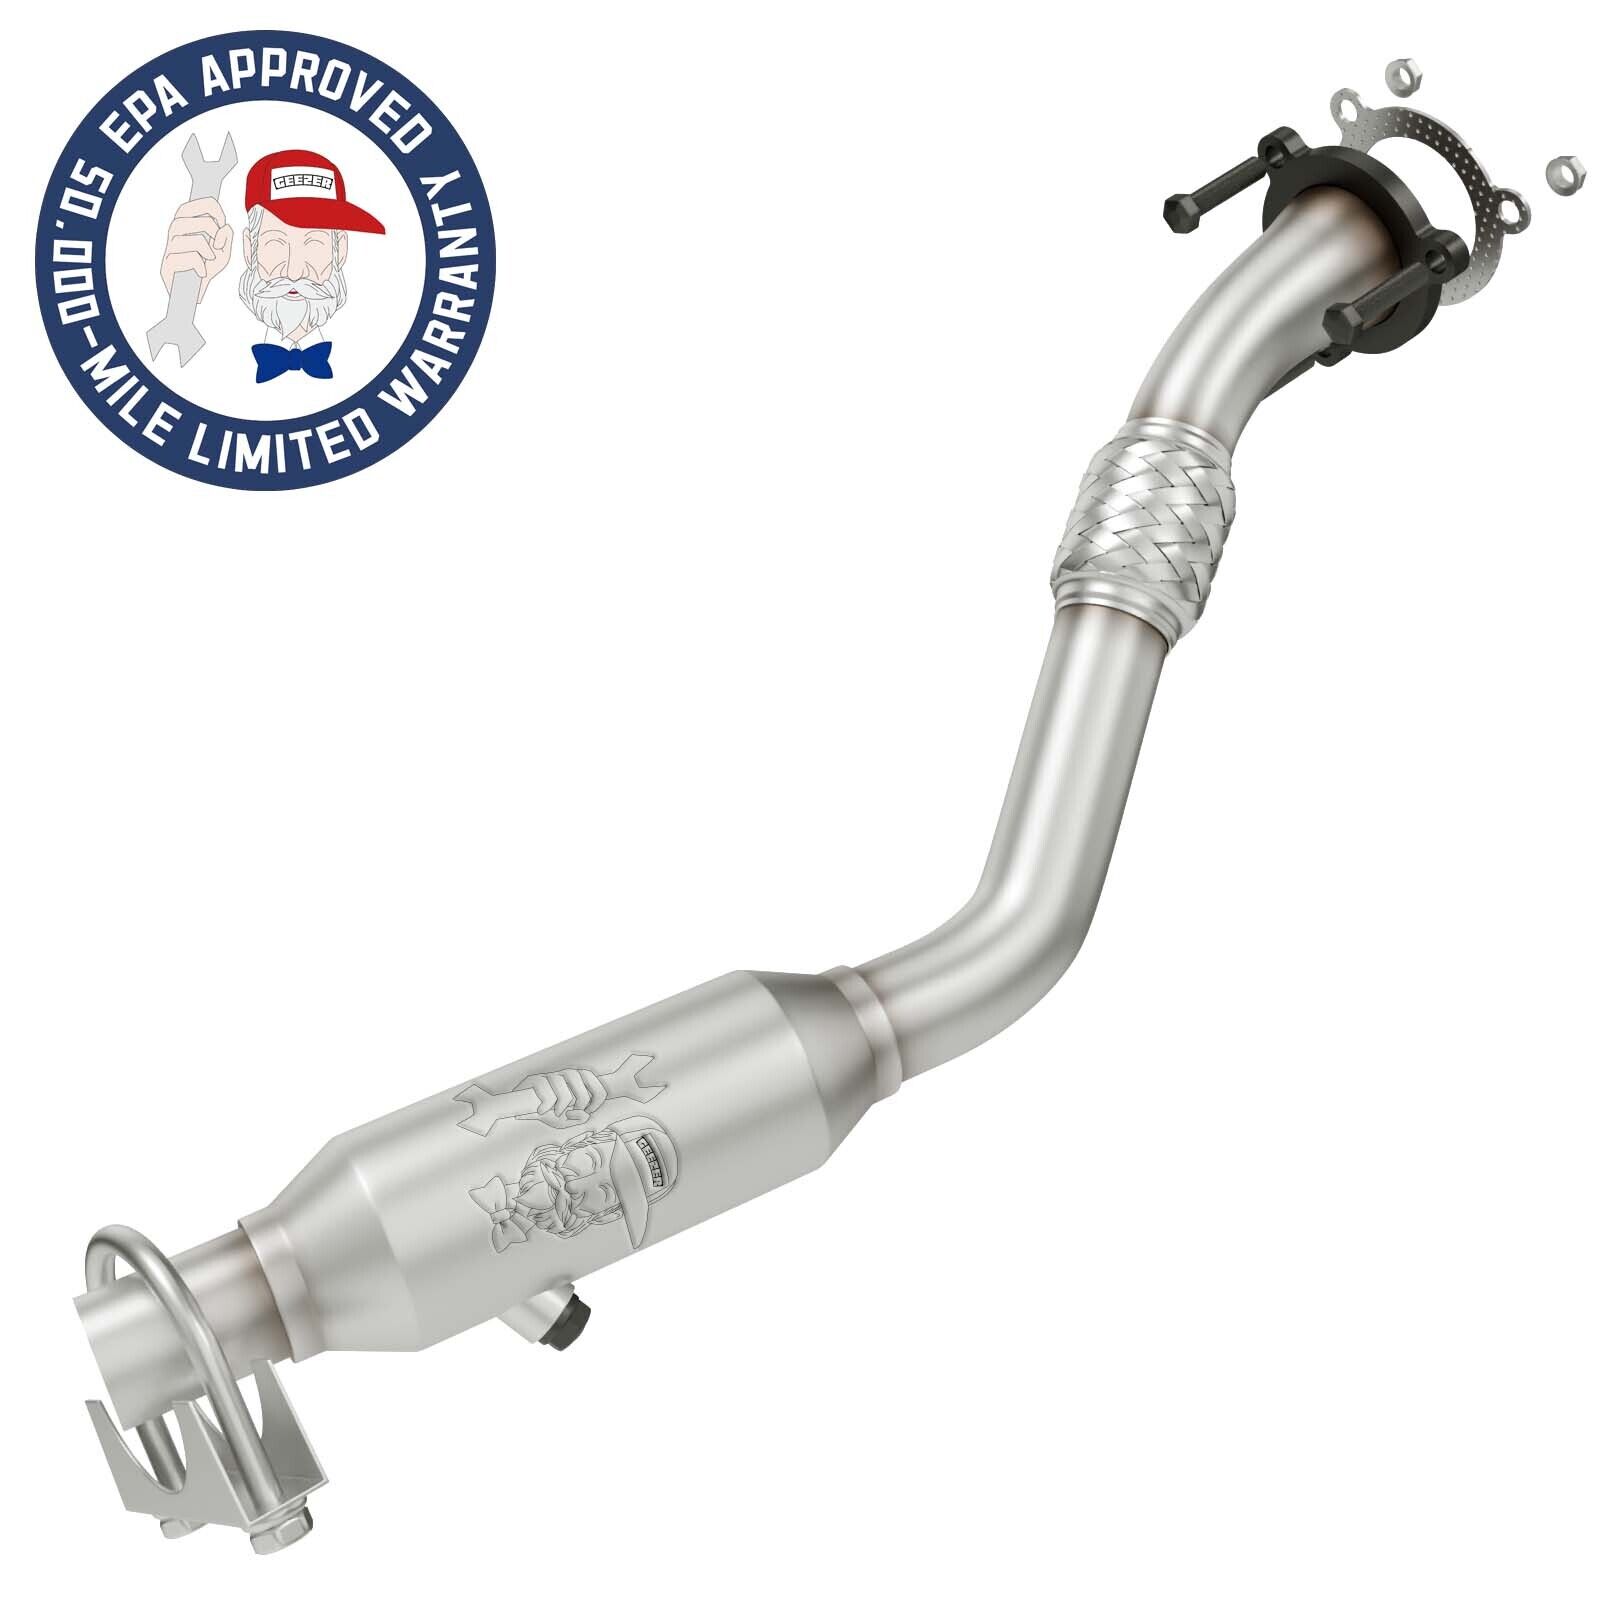 Superior For 2004-2006 Chrysler Pacifica 3.5L Catalytic Converter EPA Approved